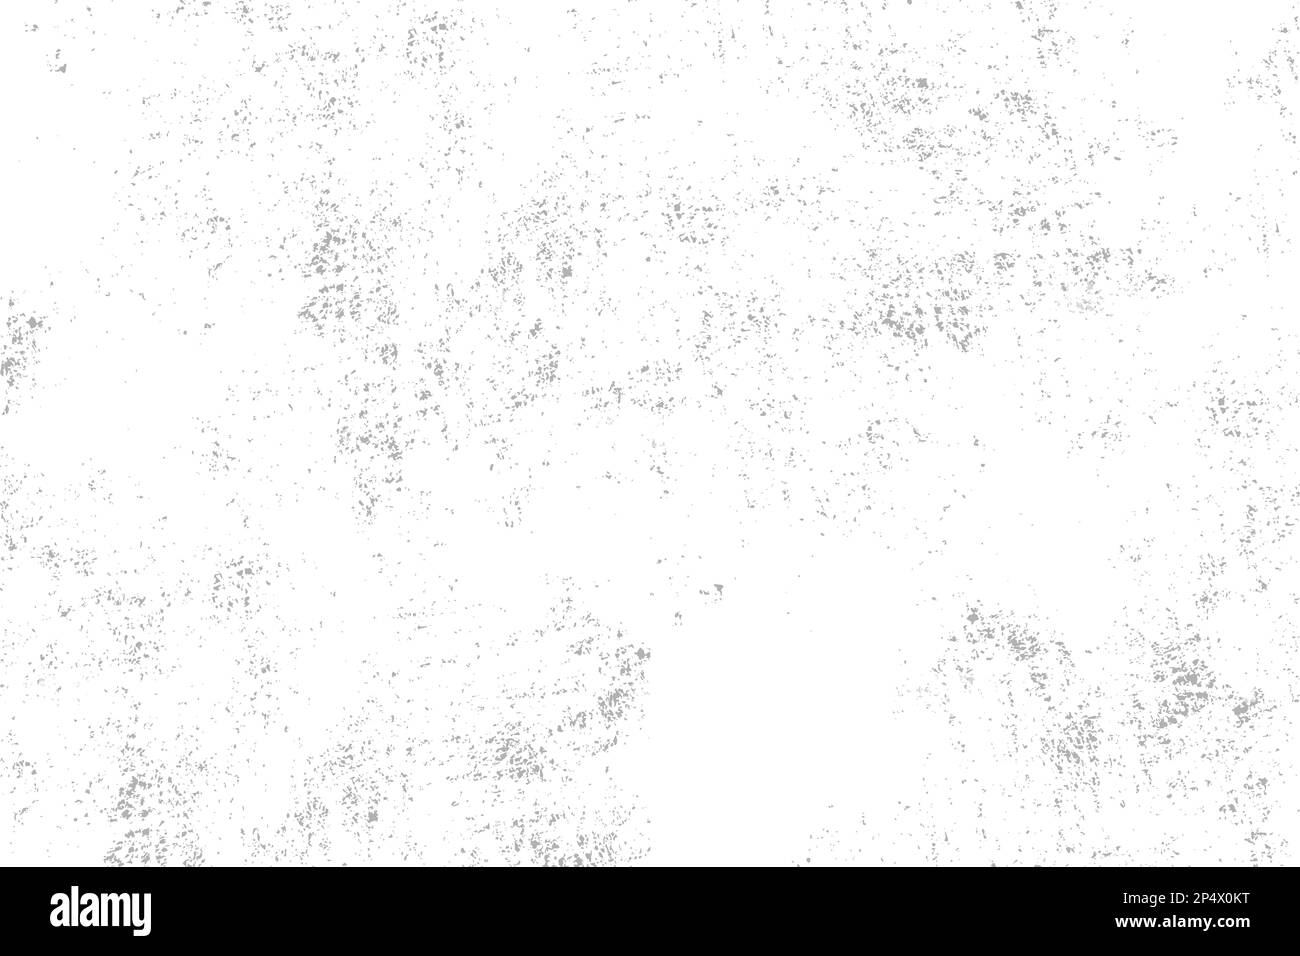 Abstract grunge texture background illustration Stock Vector